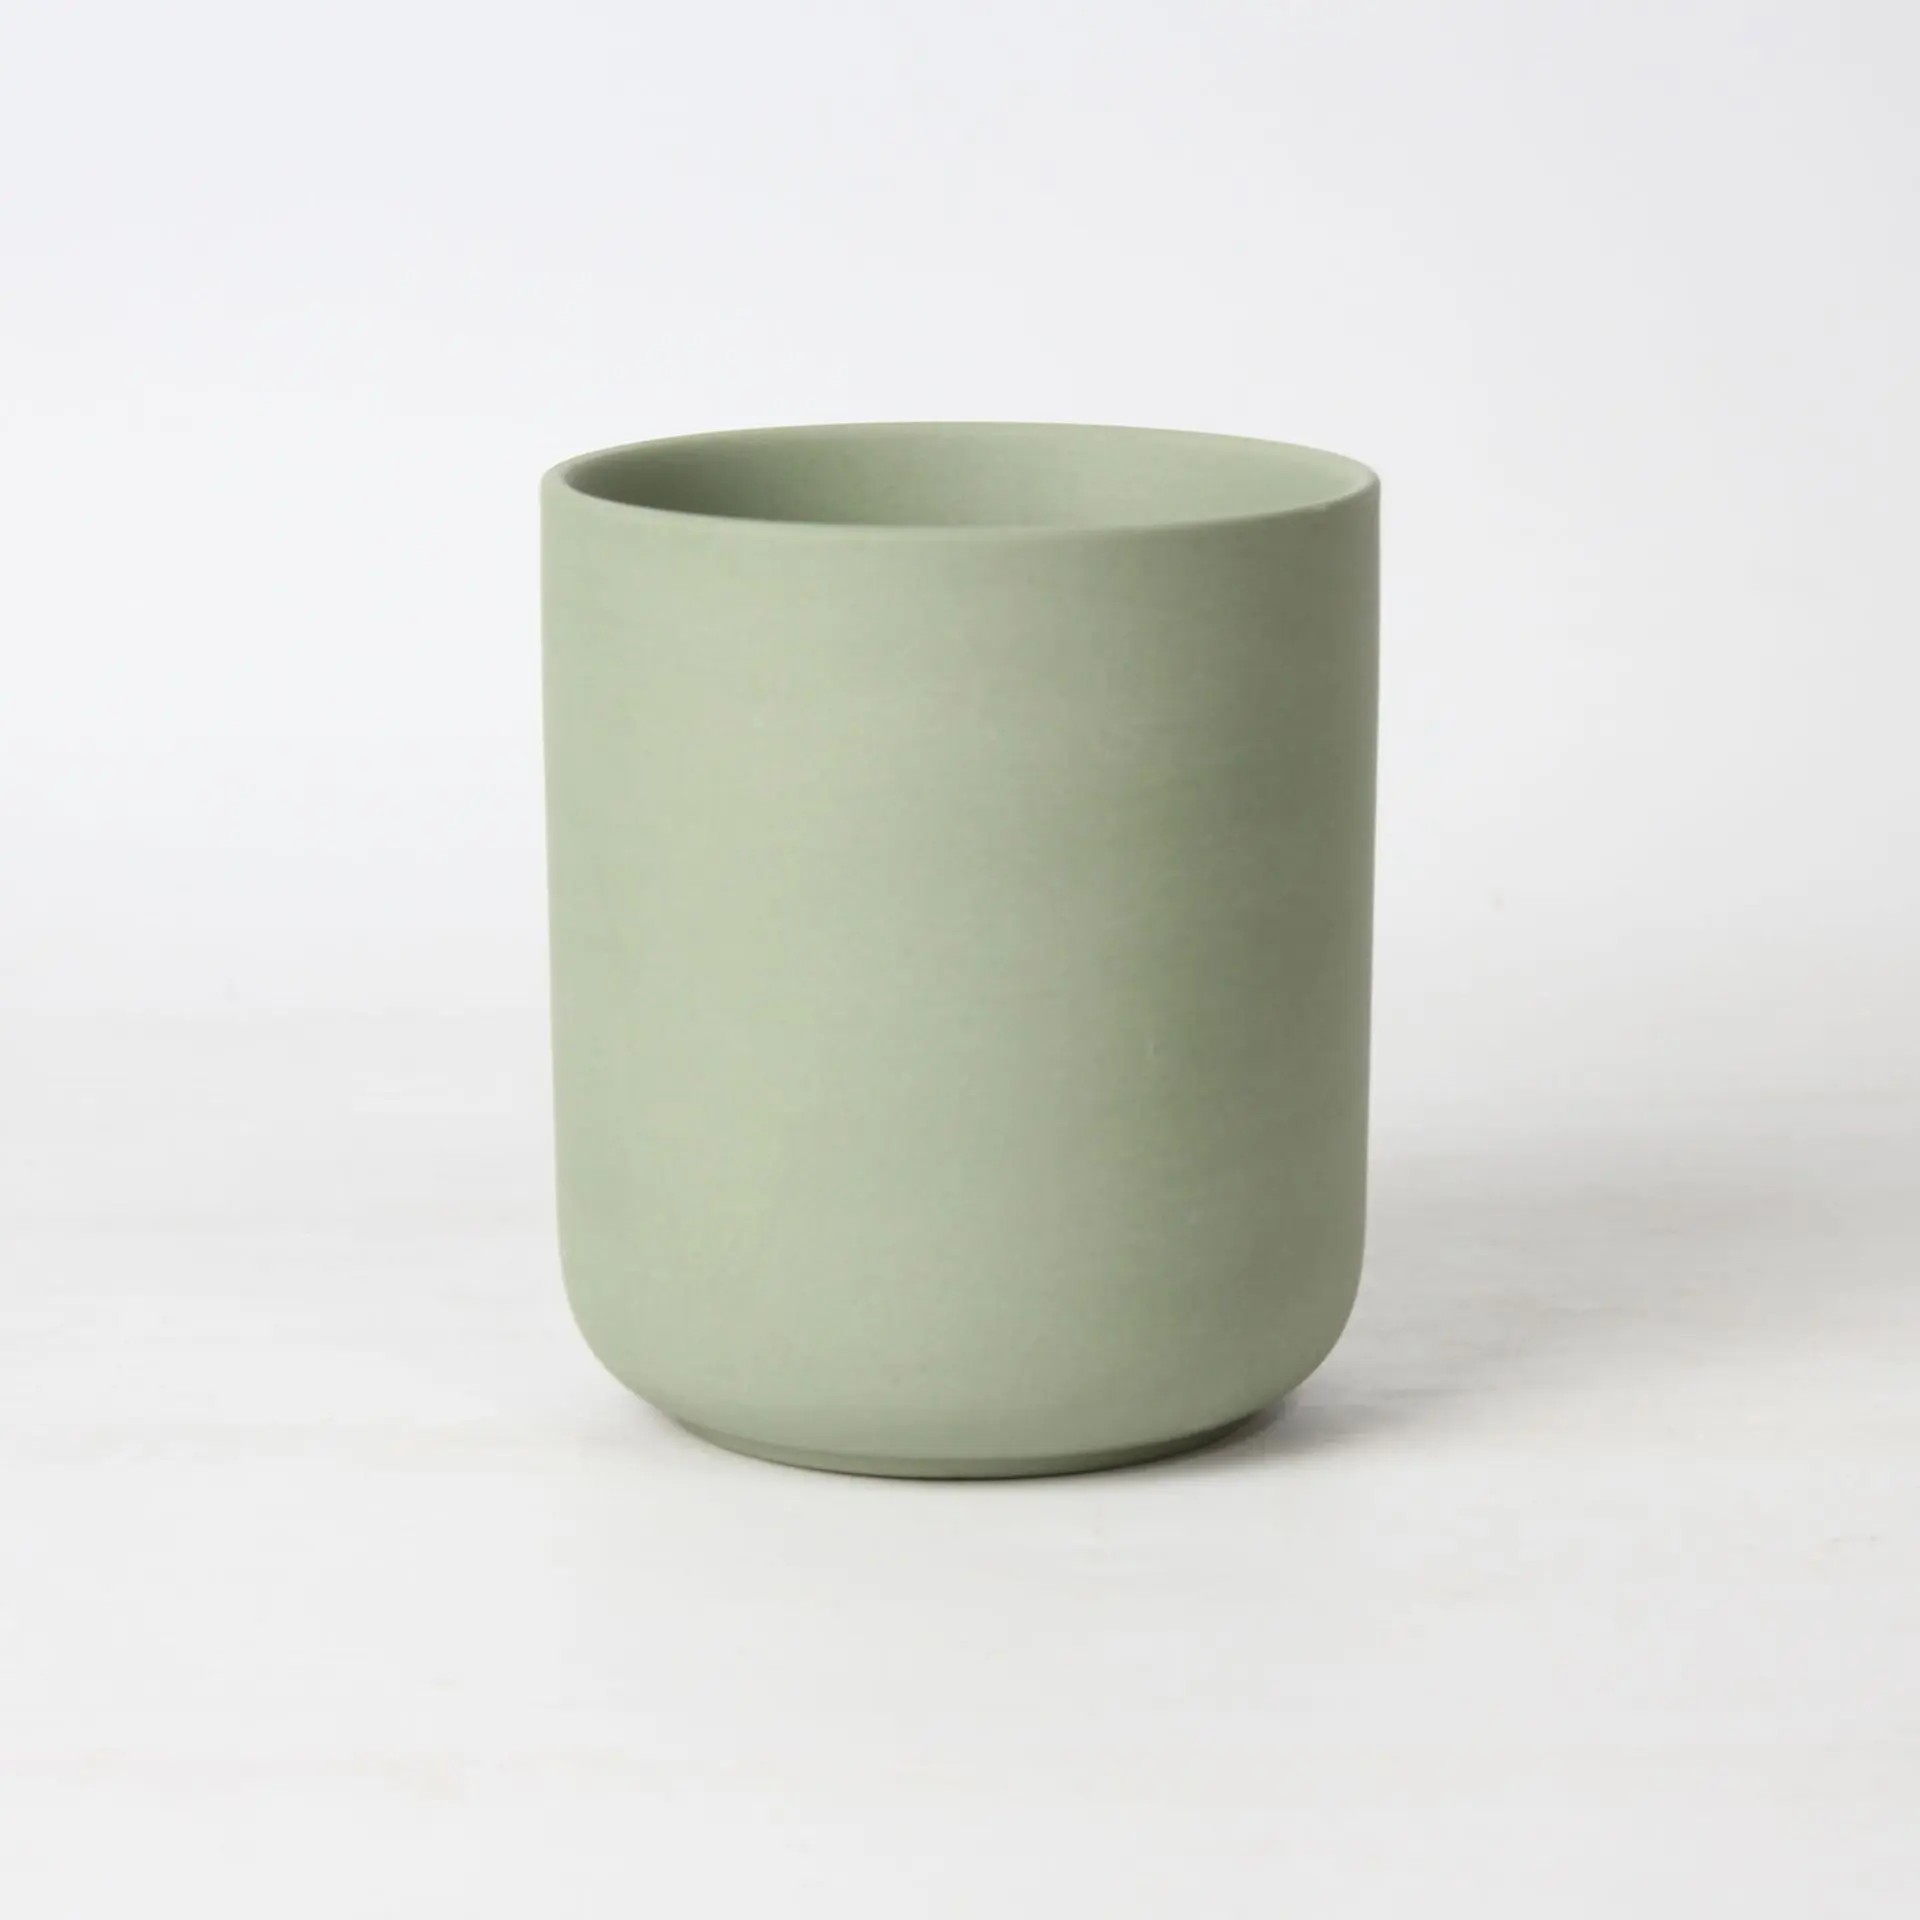 Handcrafted Matte Ceramic Jar with Minimalist Design Candle holders New Zealand